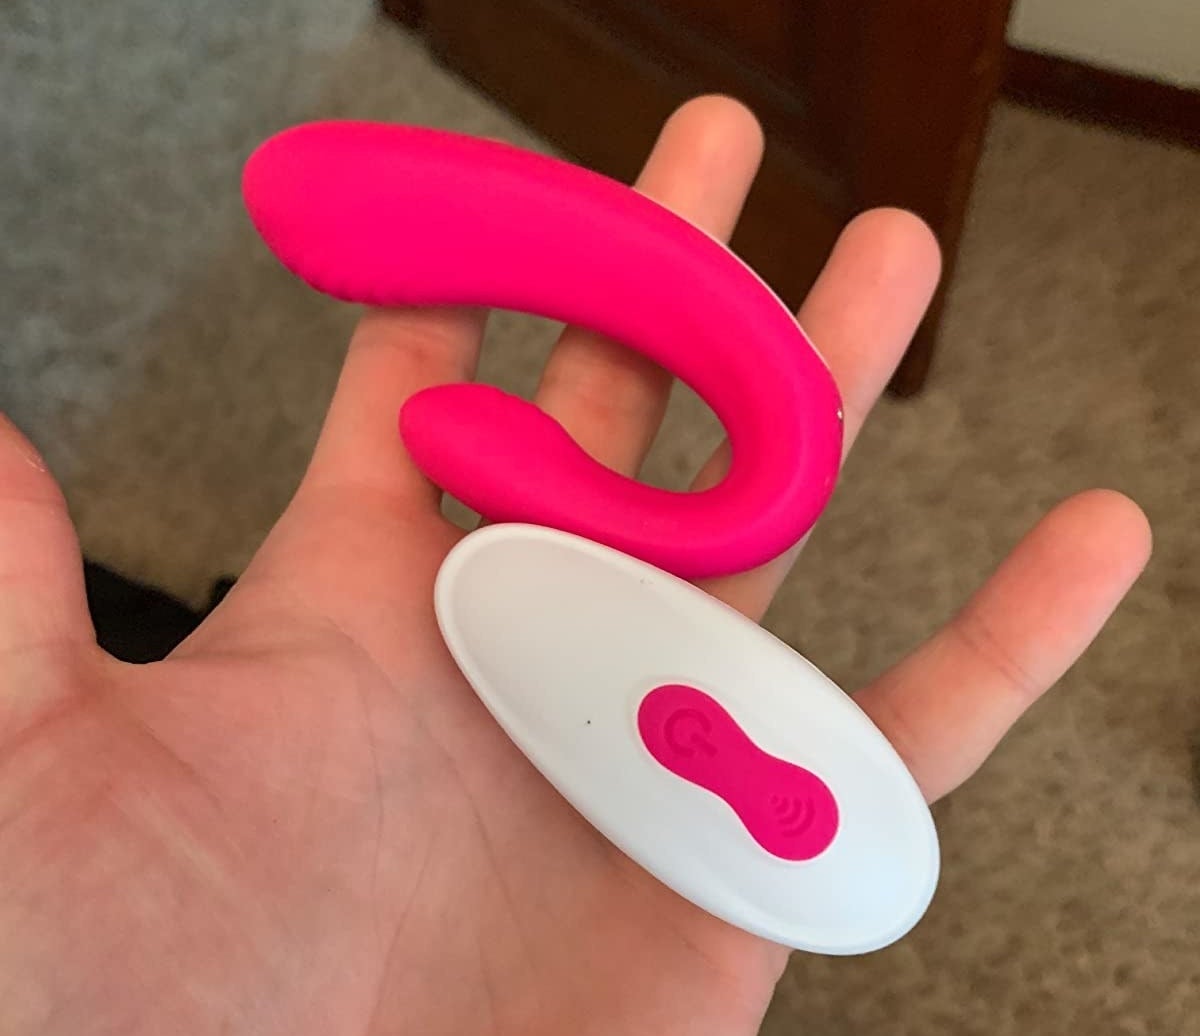 Reviewer holding pink g-spot vibrator and white wireless remote